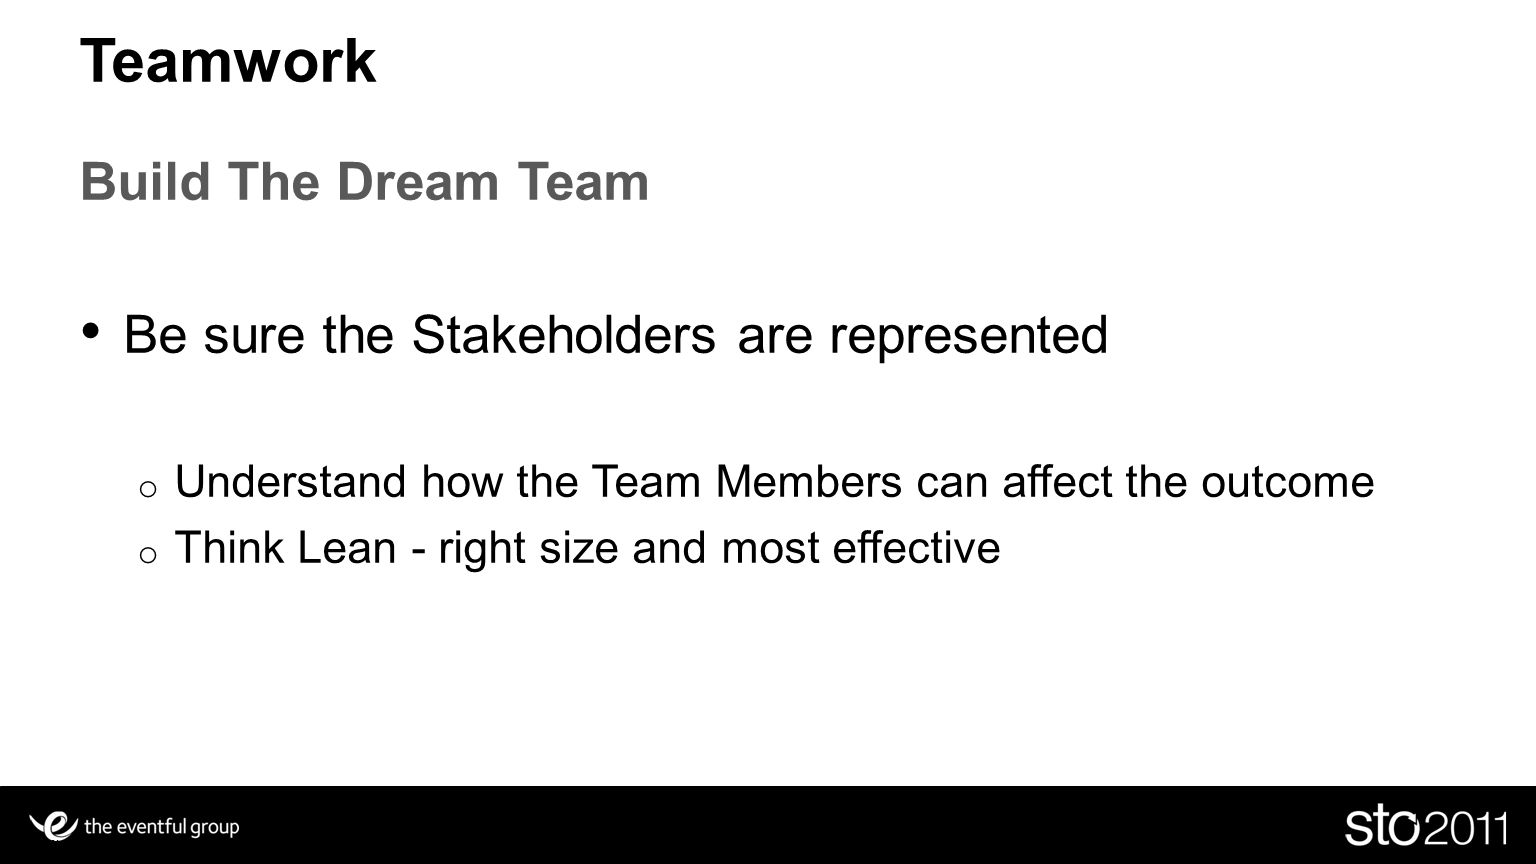 Slide 7 Teamwork Build The Dream Team Be sure the Stakeholders are represented o Understand how the Team Members can affect the outcome o Think Lean - right size and most effective